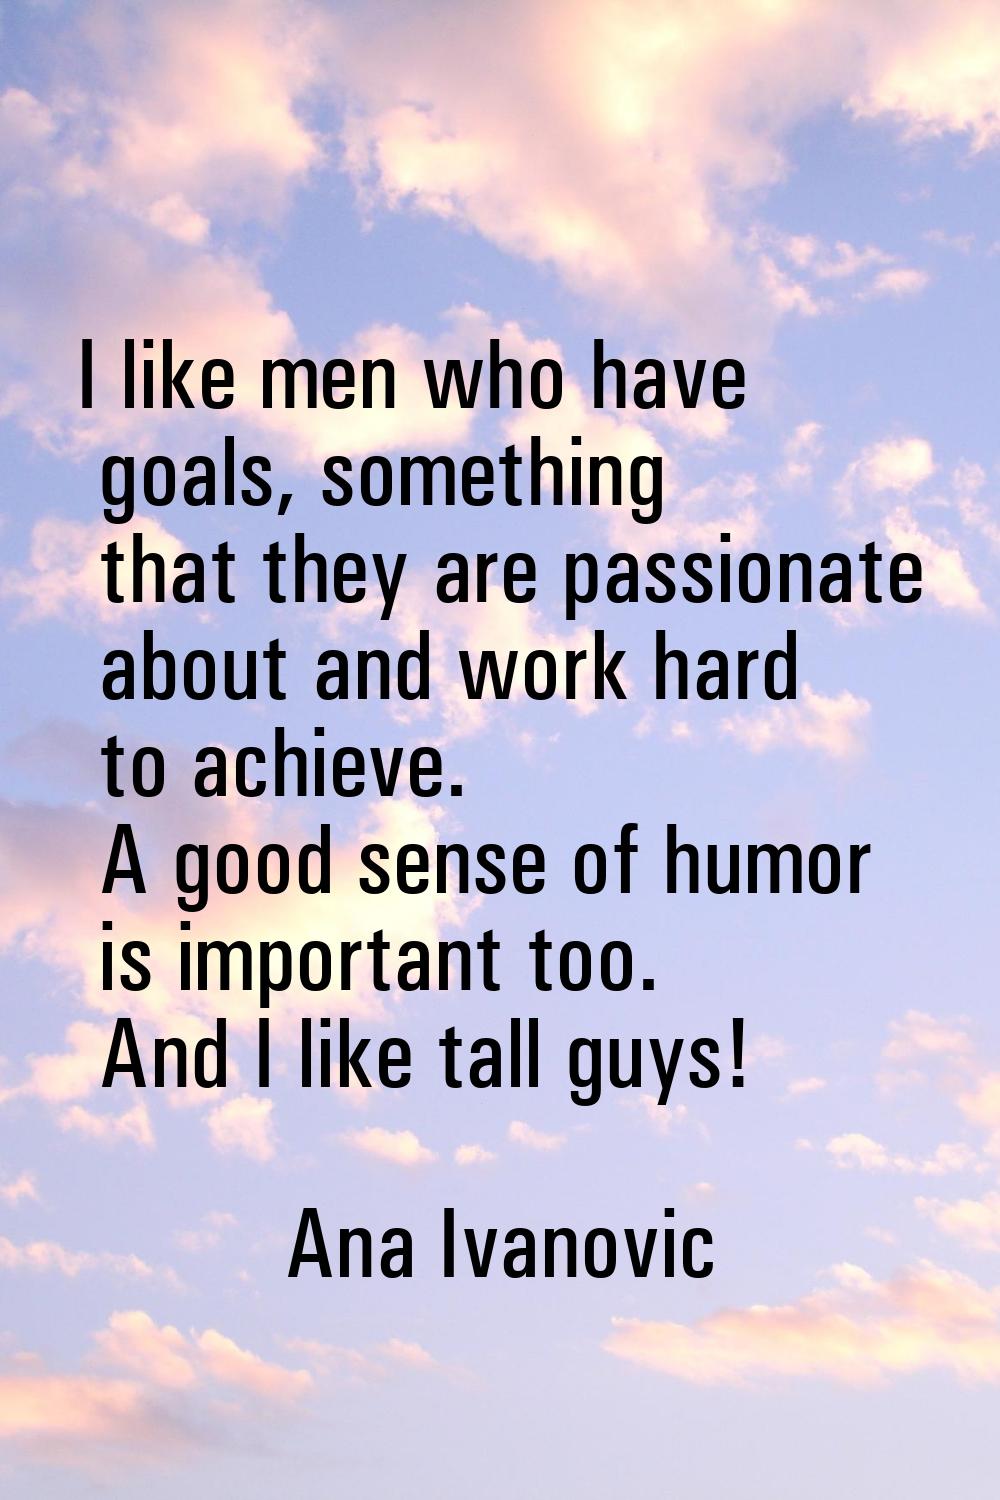 I like men who have goals, something that they are passionate about and work hard to achieve. A goo